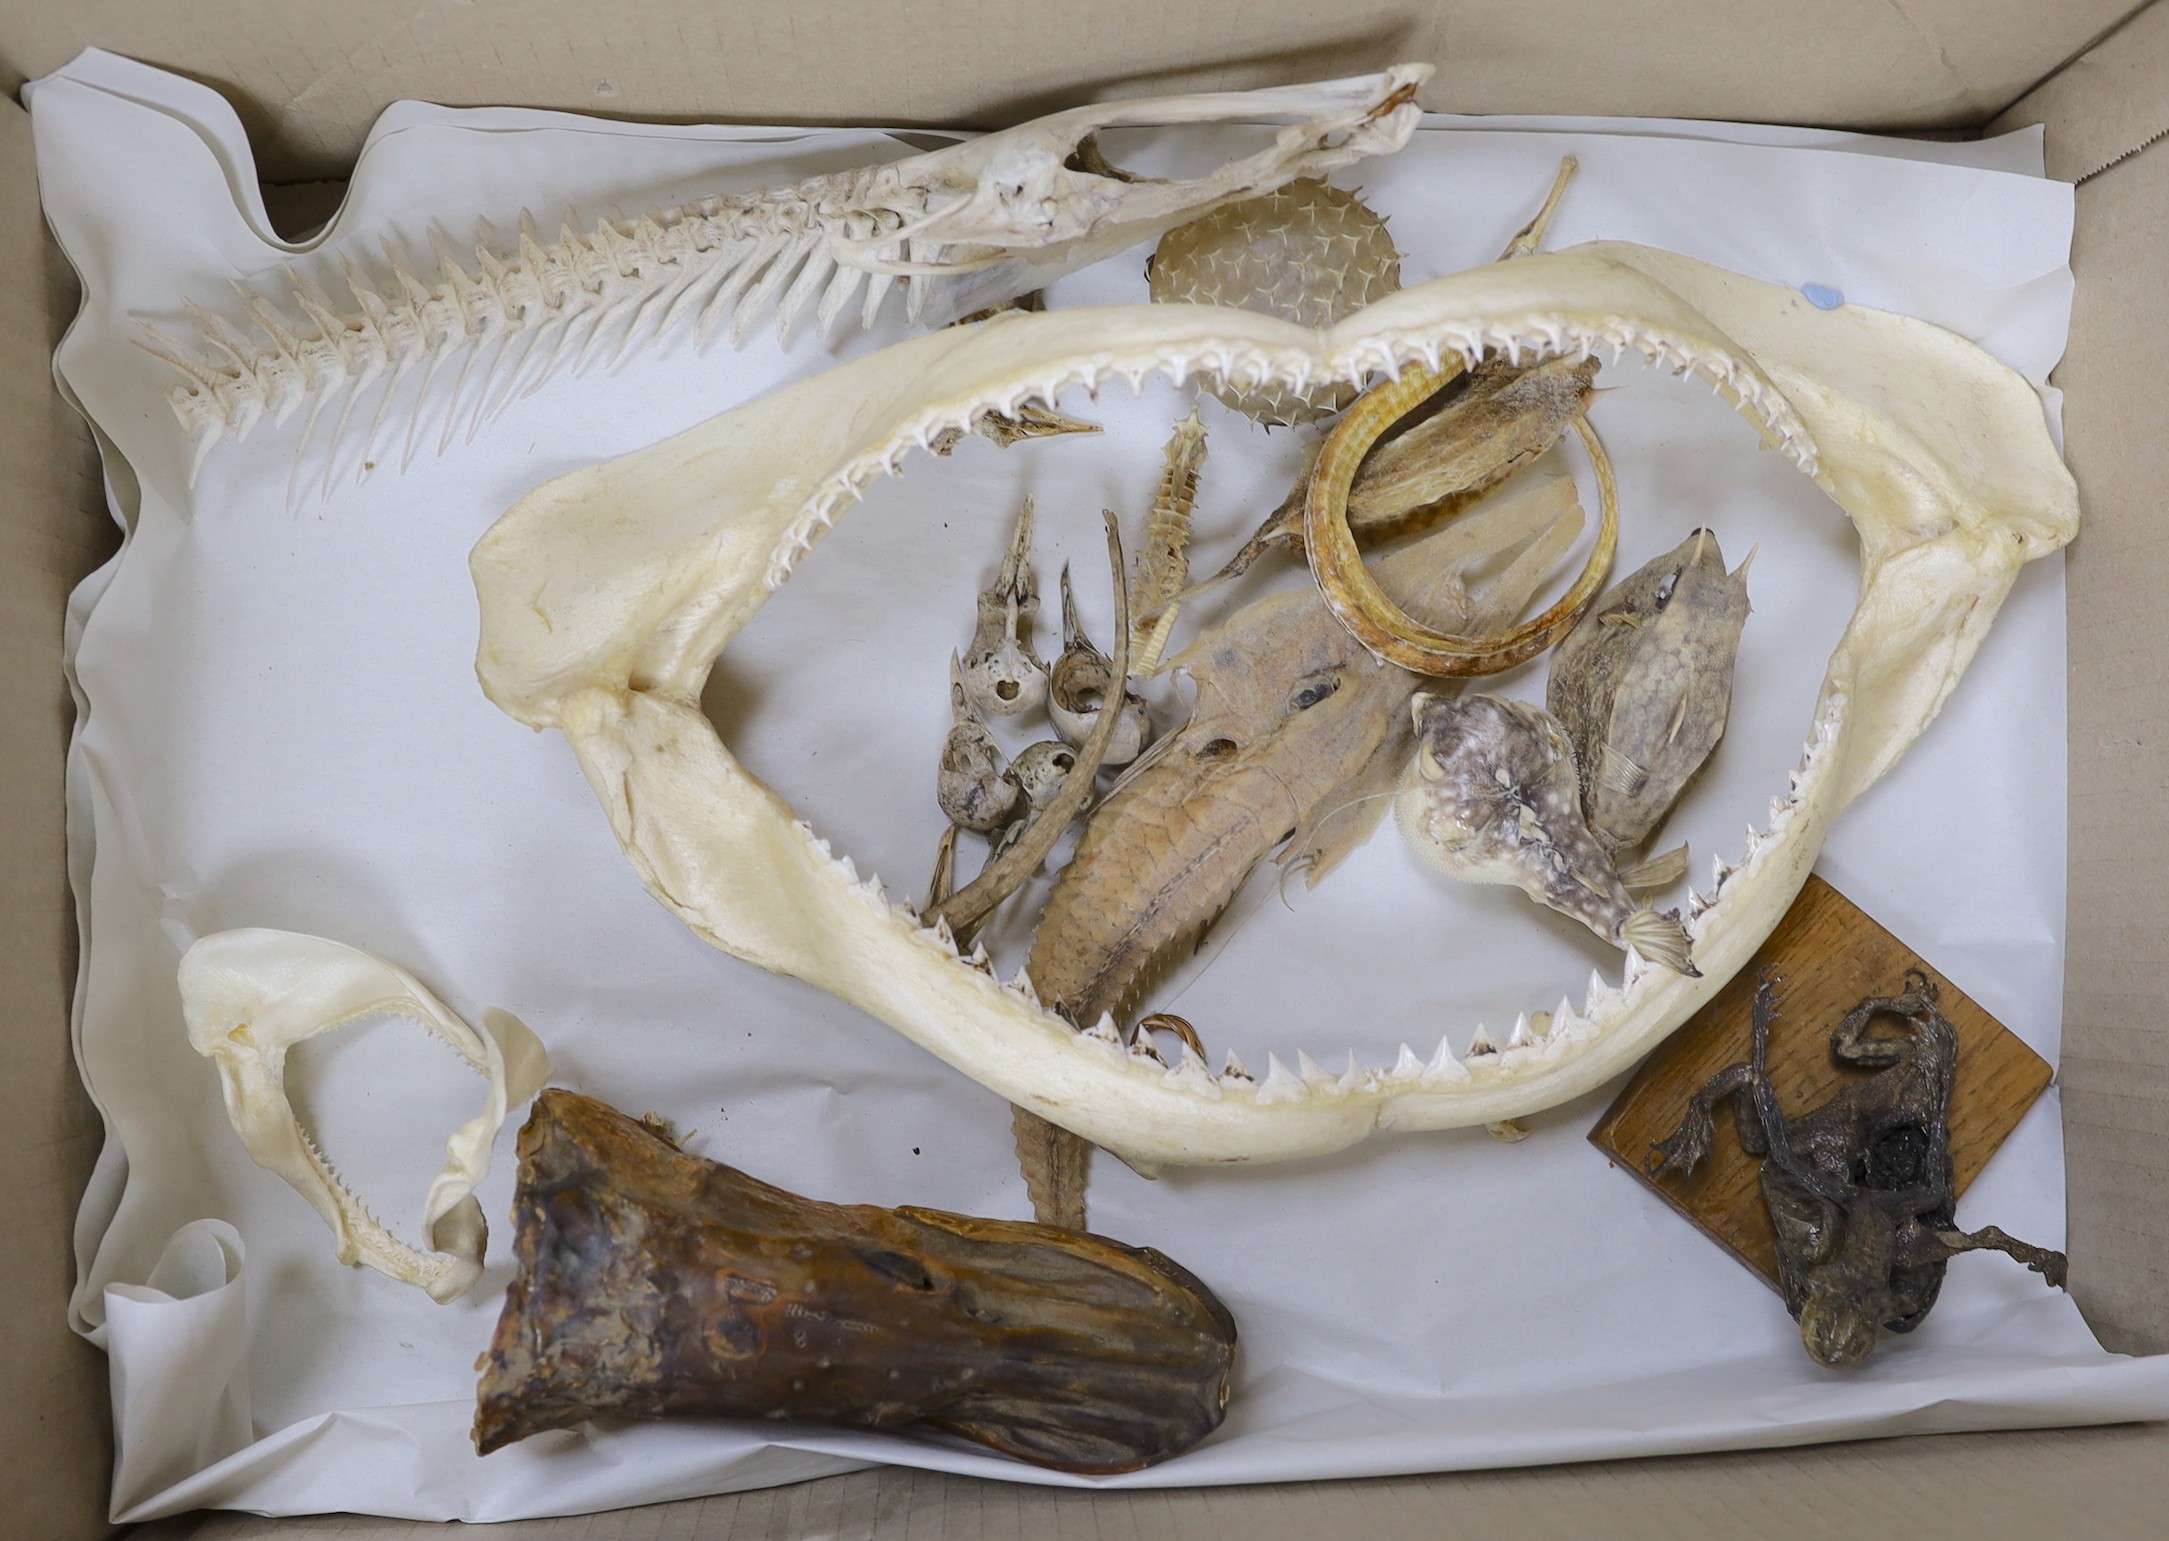 Fish and amphibian anatomy and dried specimens, including a shark jaw, 37.5 cm wide, fish vertebrae and dried fish specimens